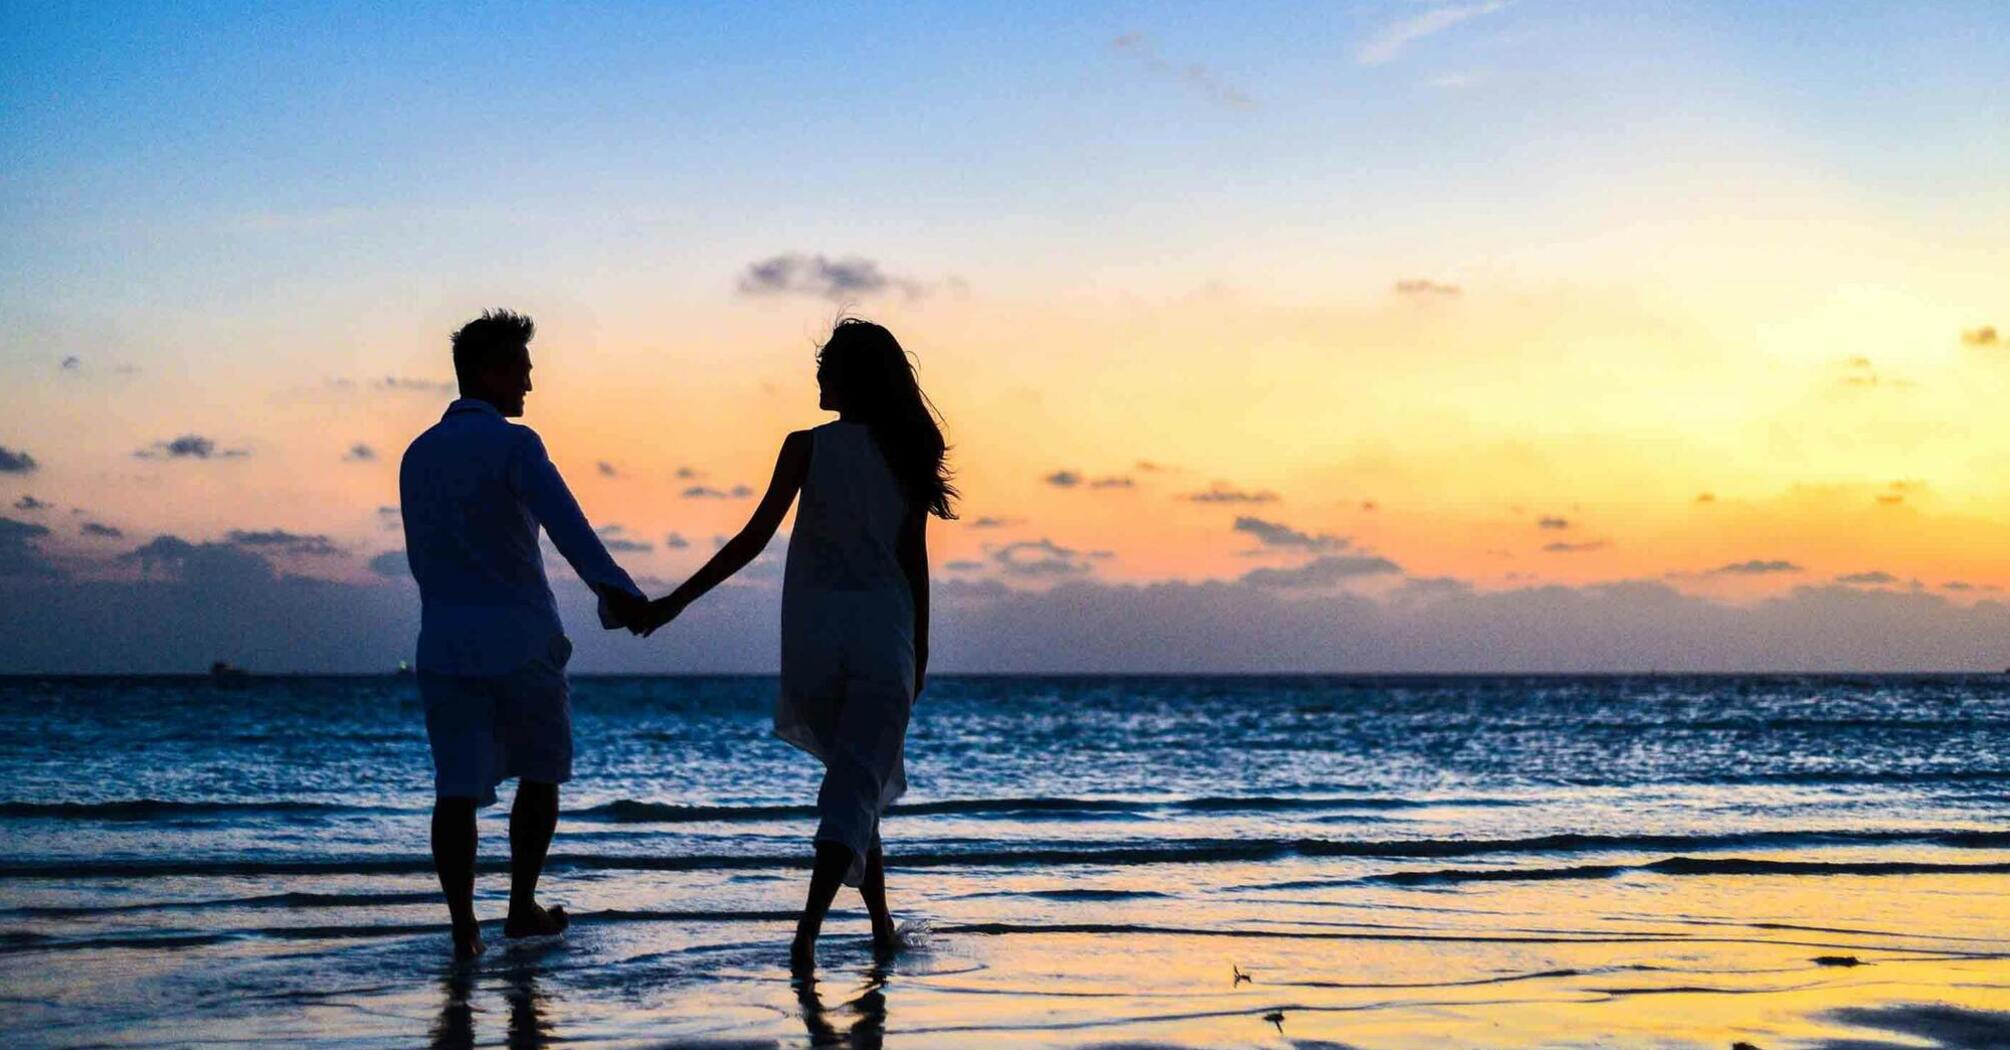 Top 20 best honeymoon destinations around the world for a romantic continuation of your wedding story